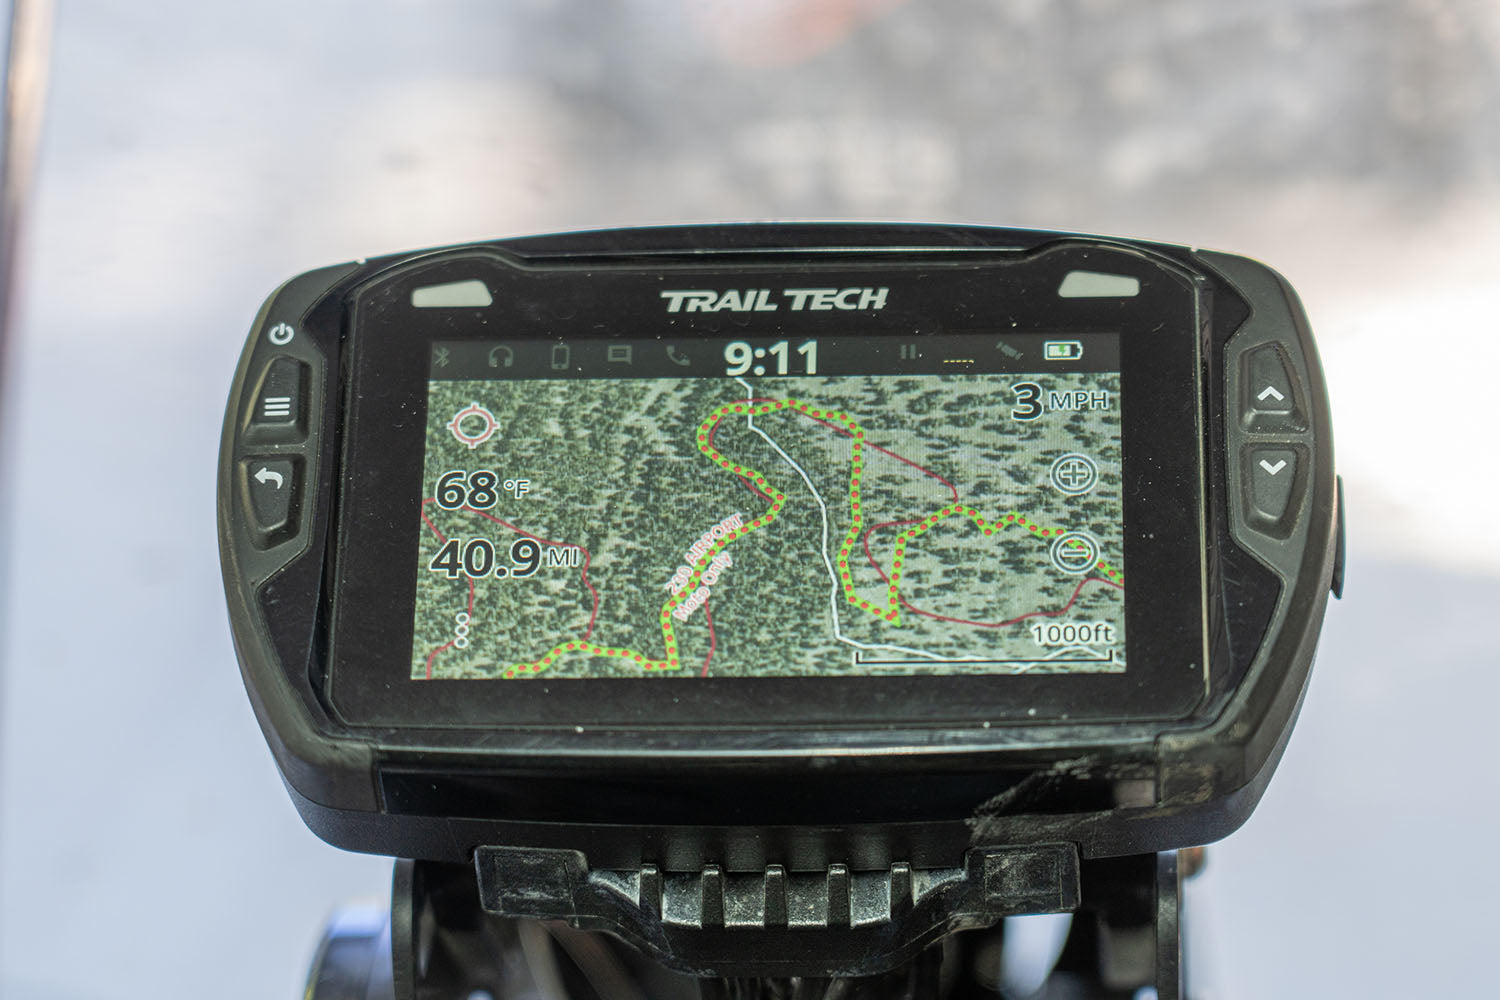 trail tech voyager pro software update